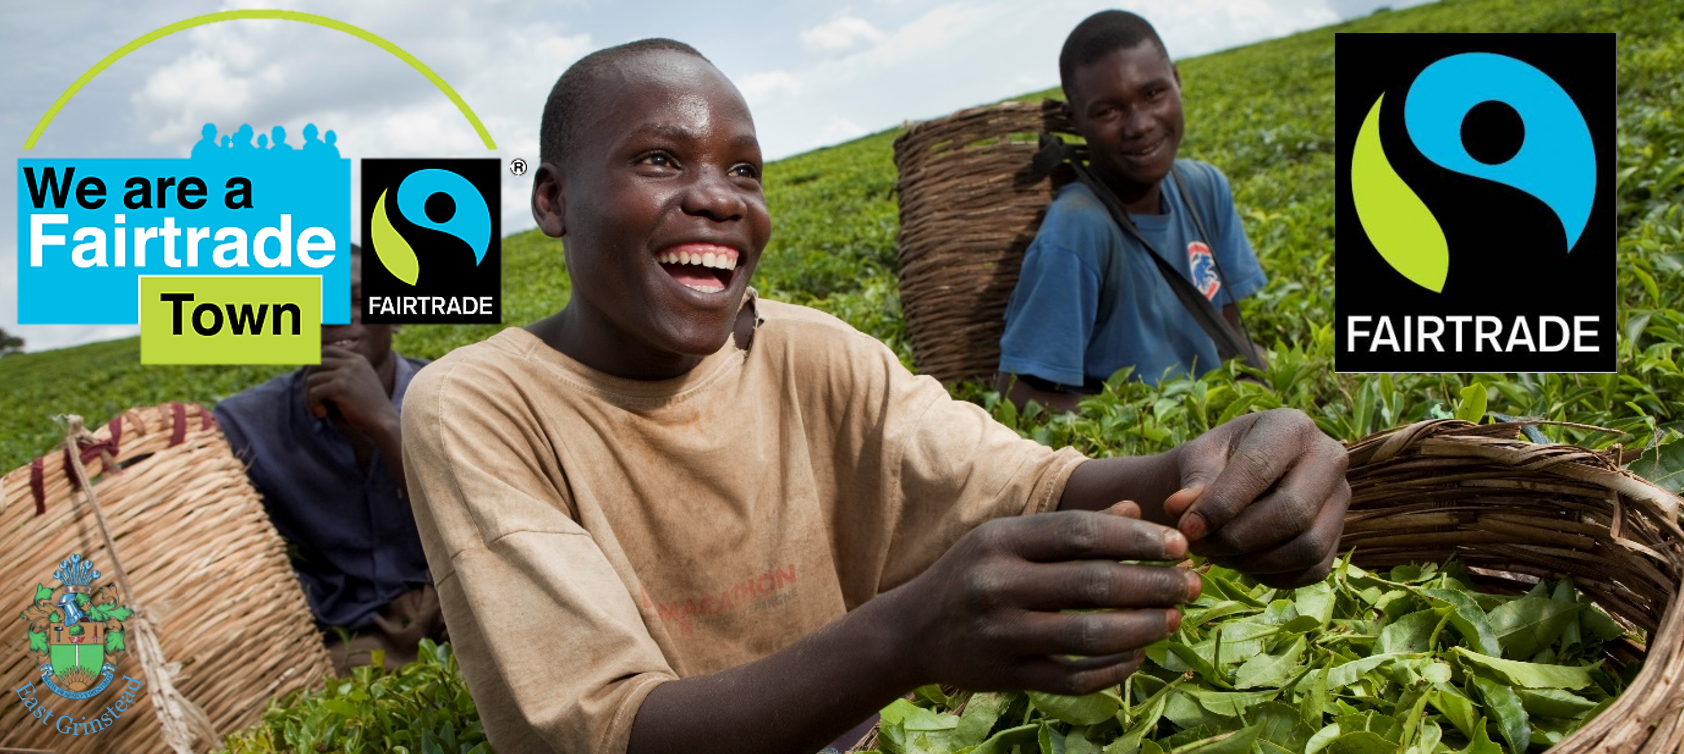 What is Fairtrade?